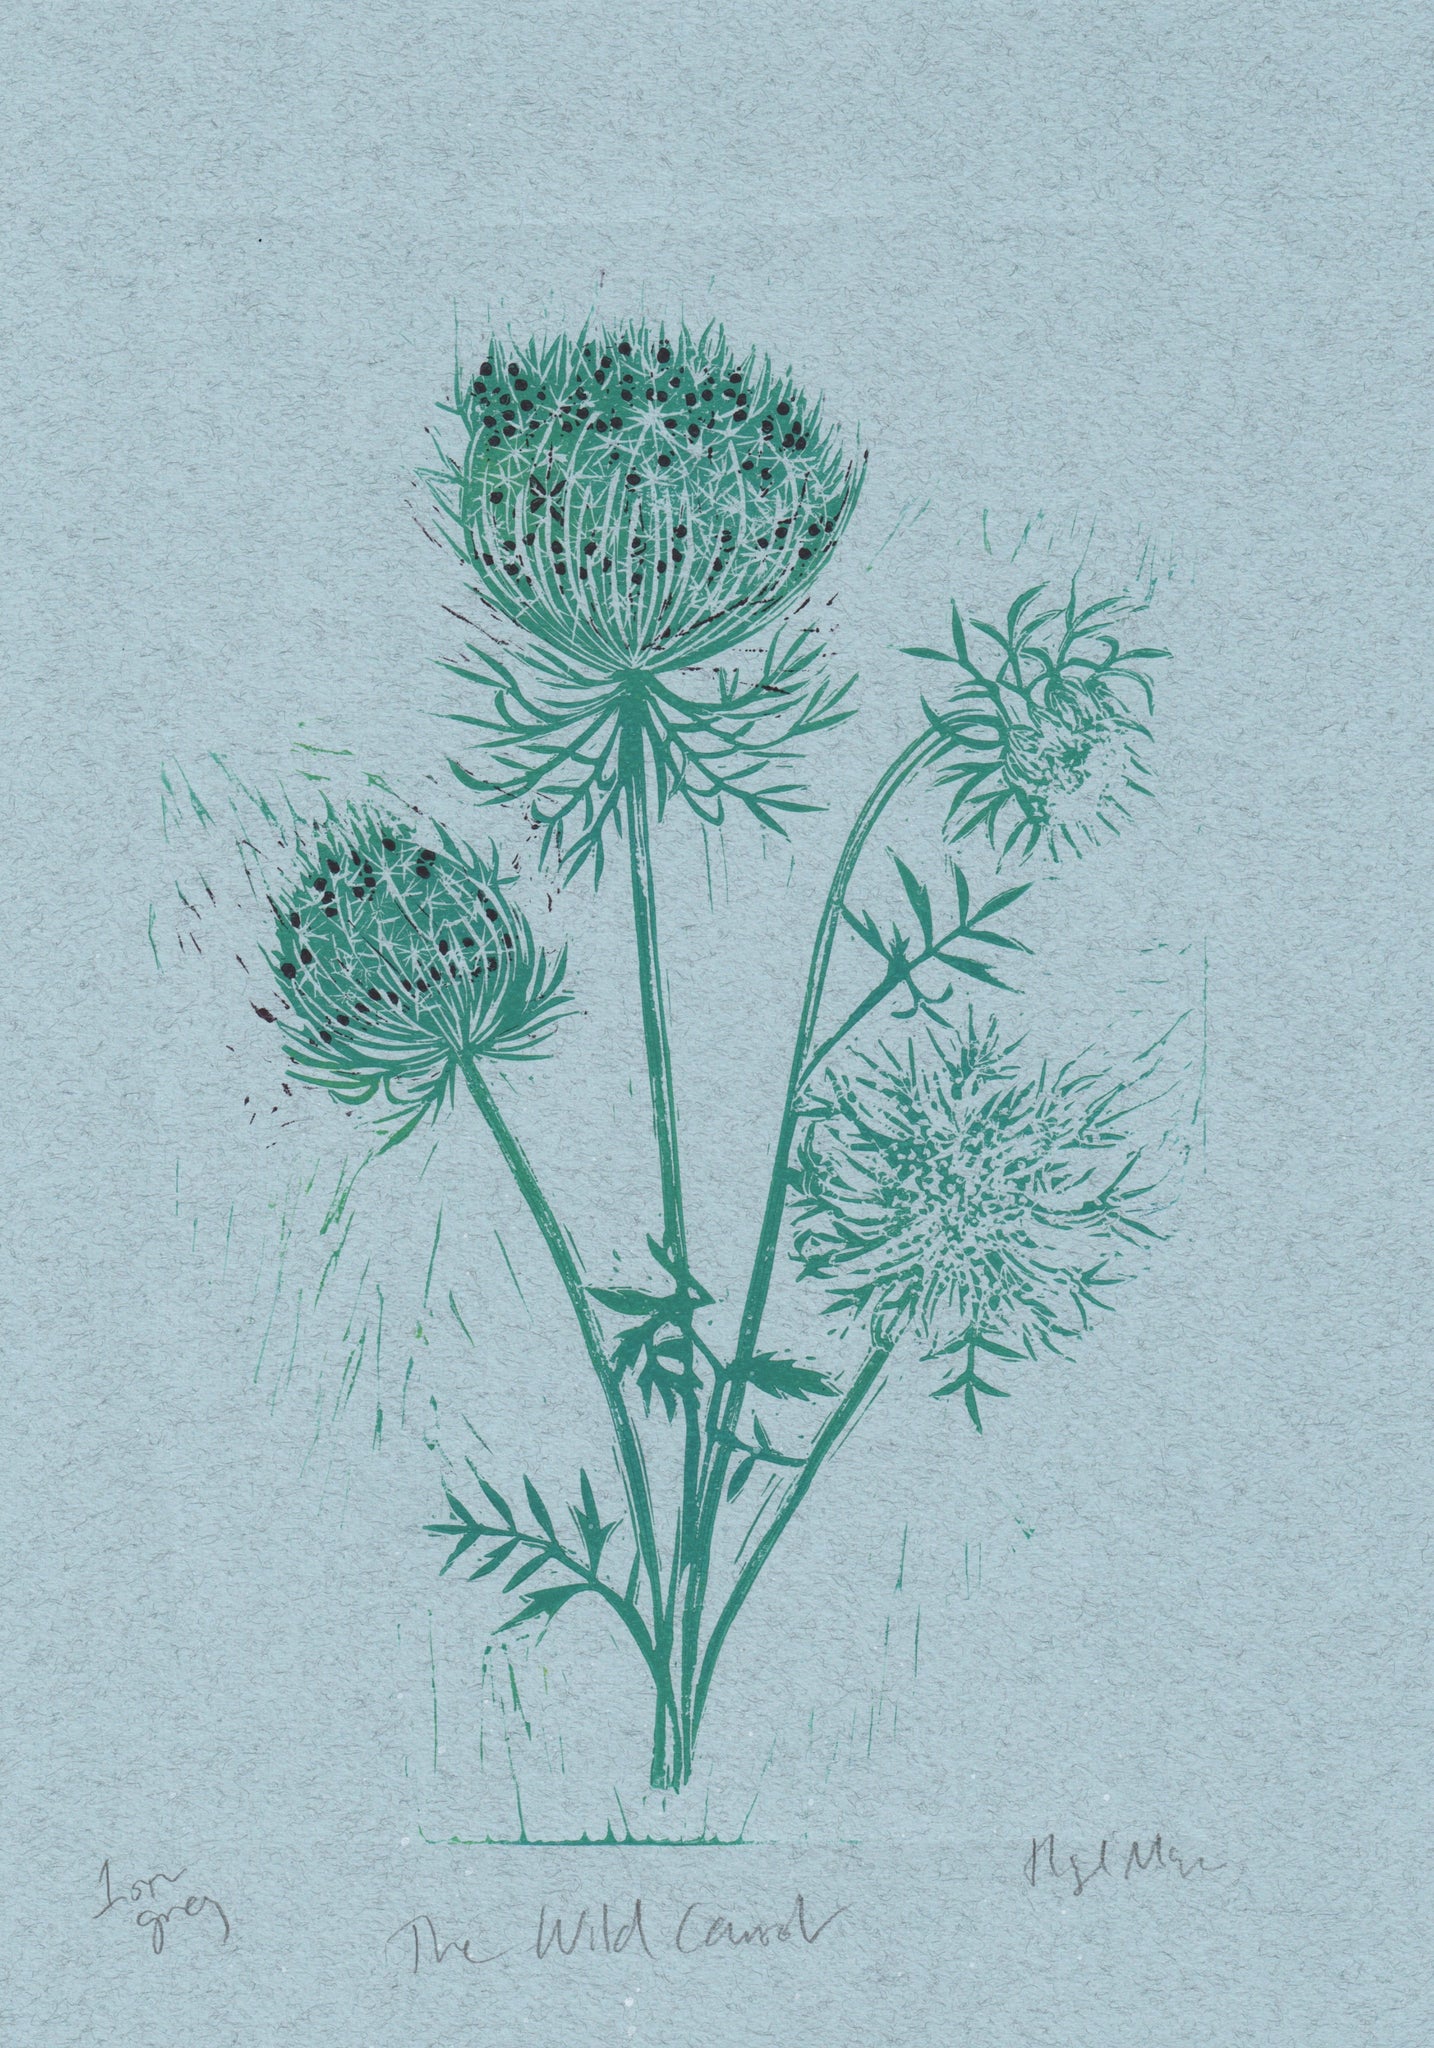 The Wild Carrot on grey